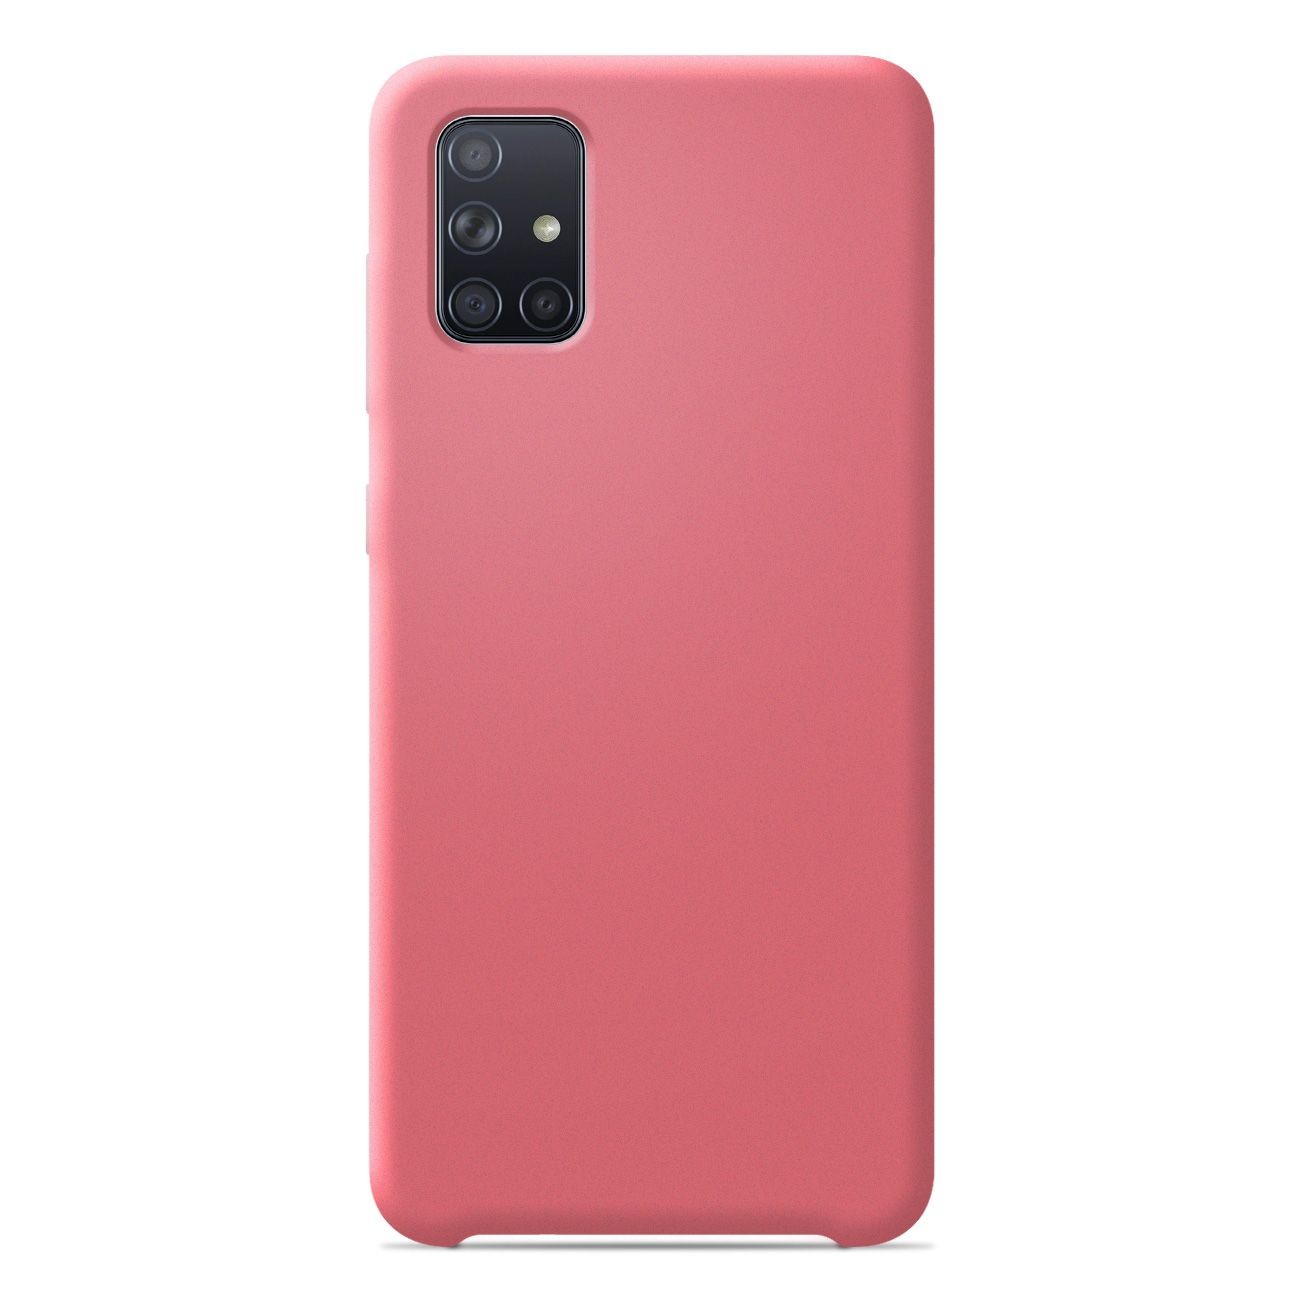 Coque silicone unie Soft Touch Rose compatible Samsung Galaxy A51